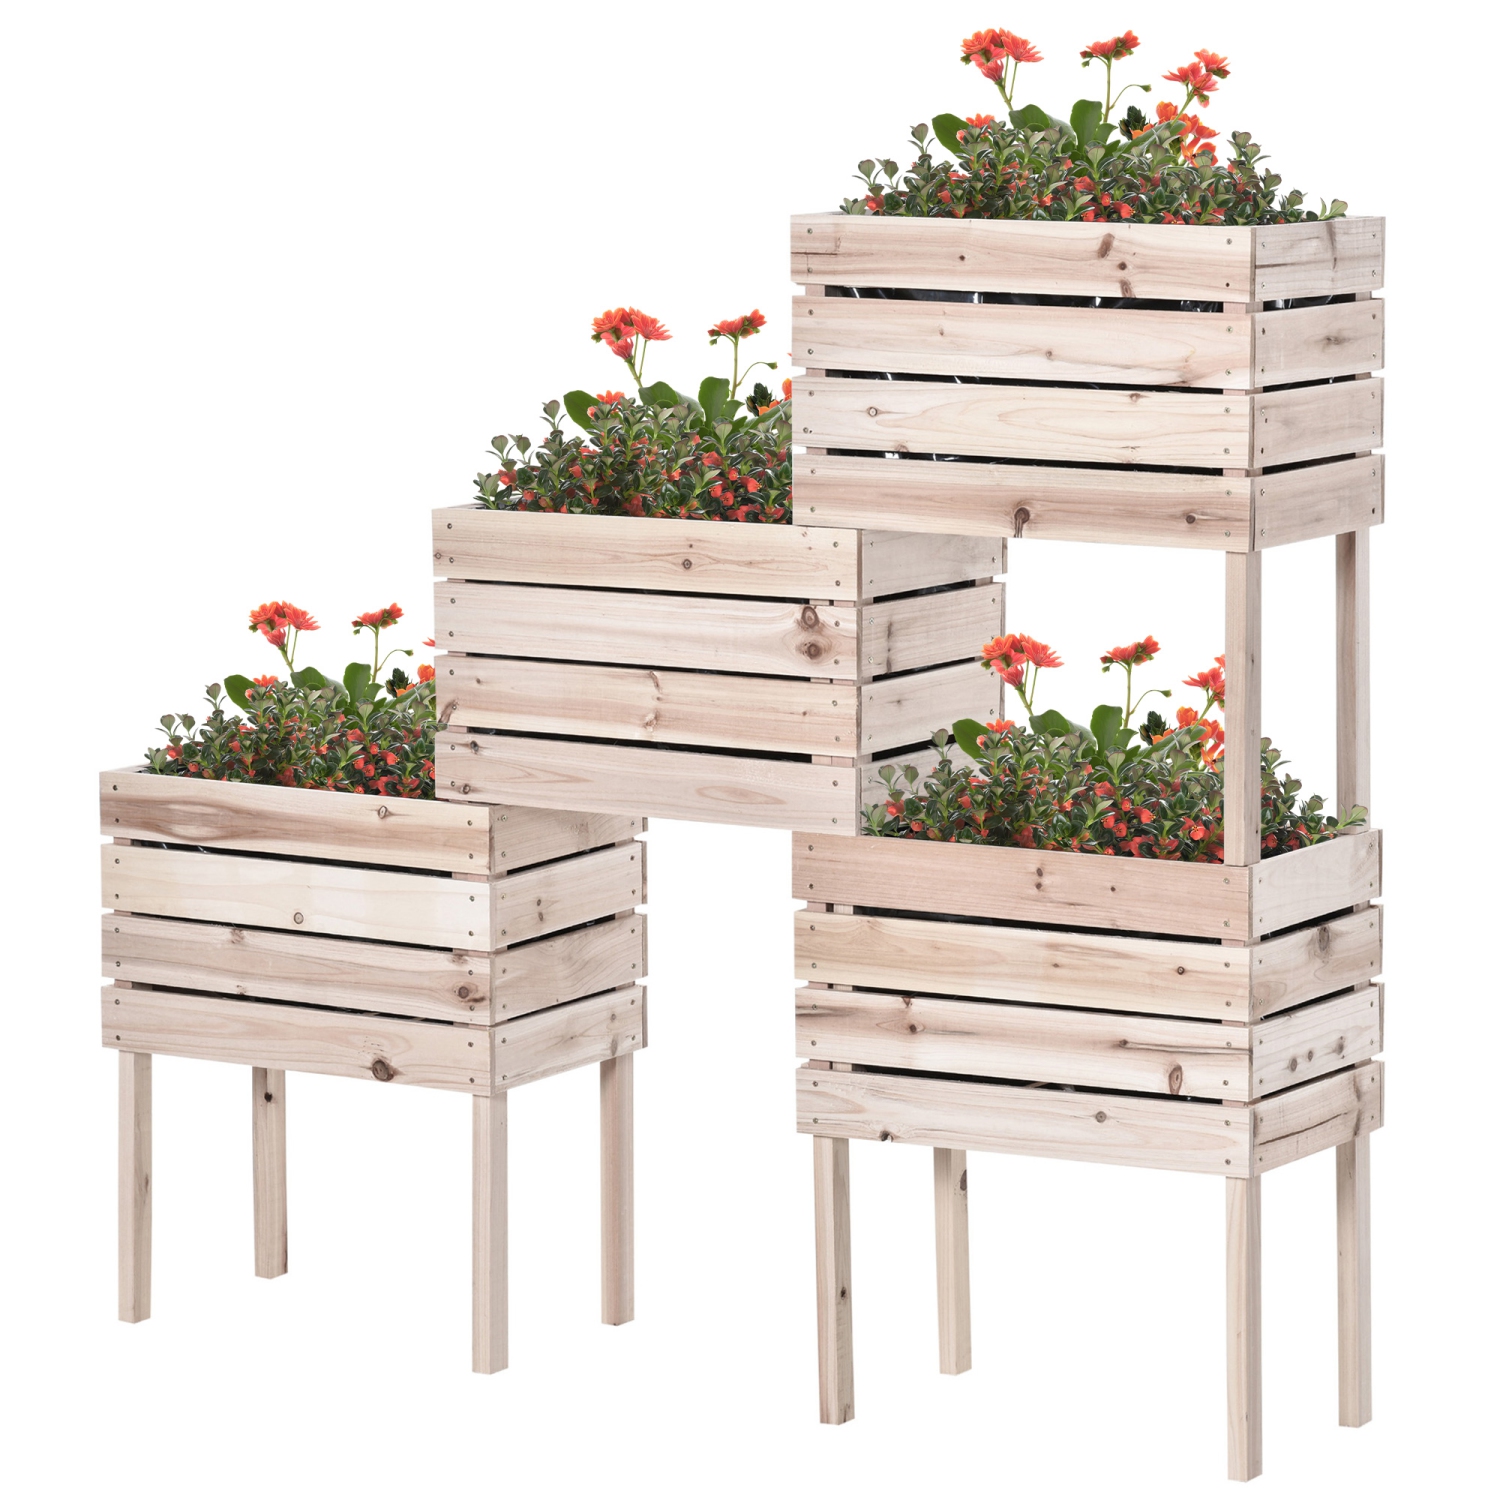 Outsunny 4PCS Wooden Raised Beds for Garden, DIY Shape Elevated Planter Box Kit with Bed Liner for Flowers Vegetables, Outdoor Indoor Planting Box Container